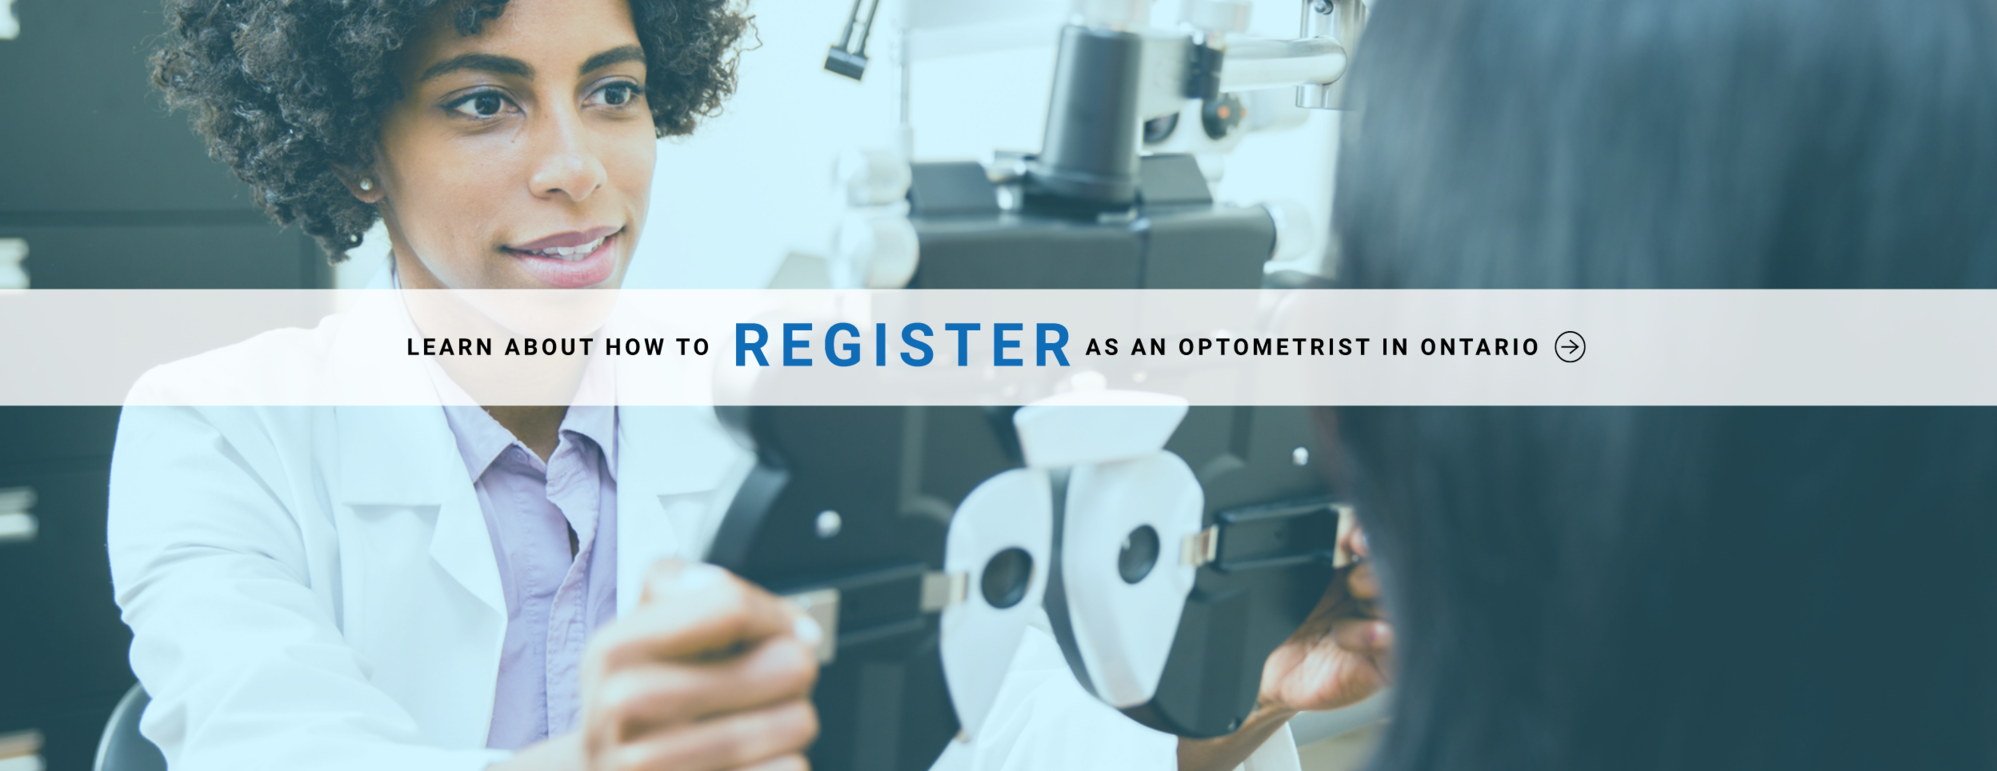 Learn about how to Register as an Optometrist in Ontario